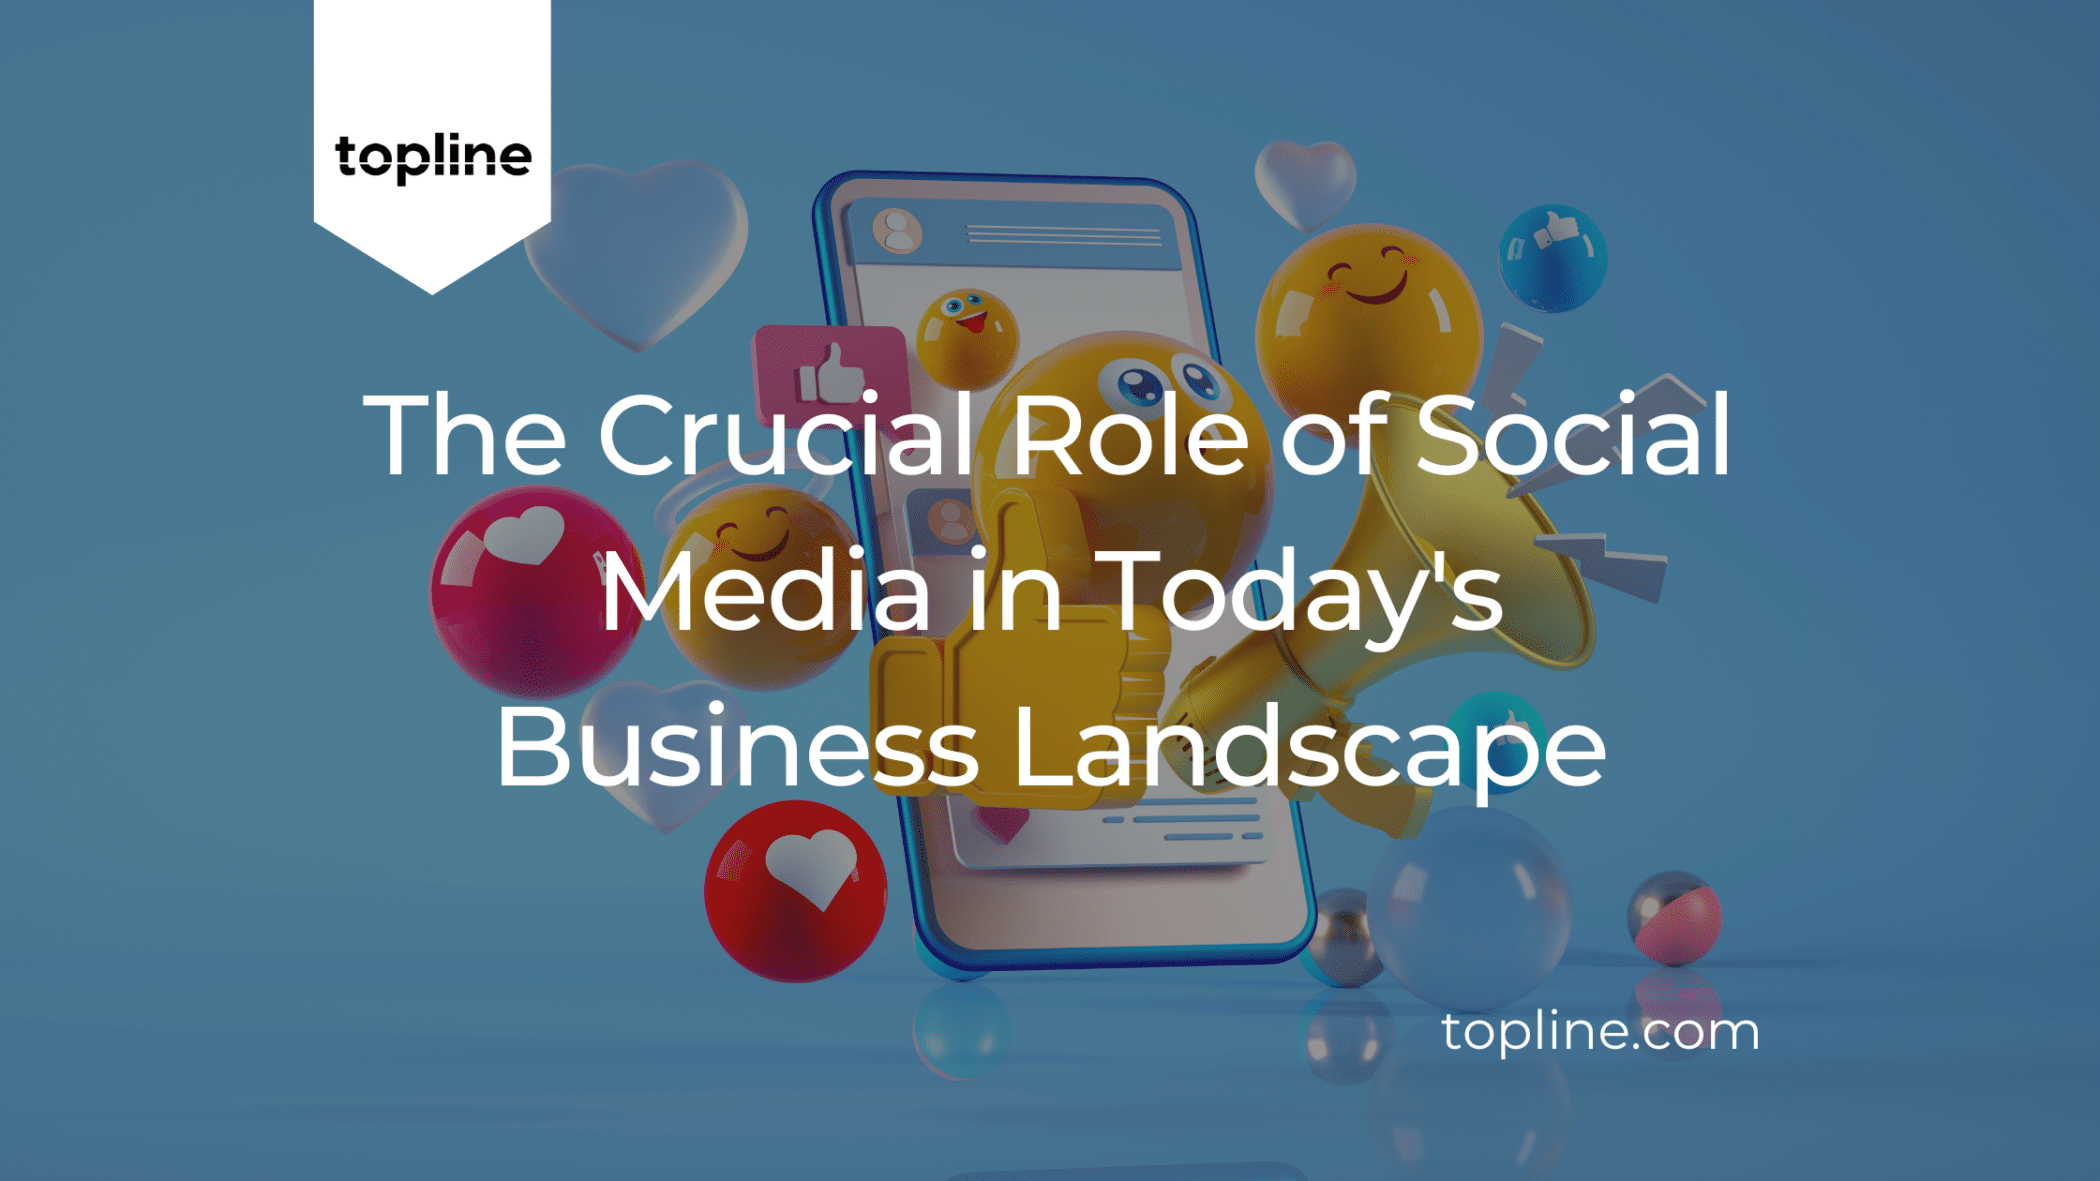 The Crucial Role of Social Media in Today’s Business Landscape